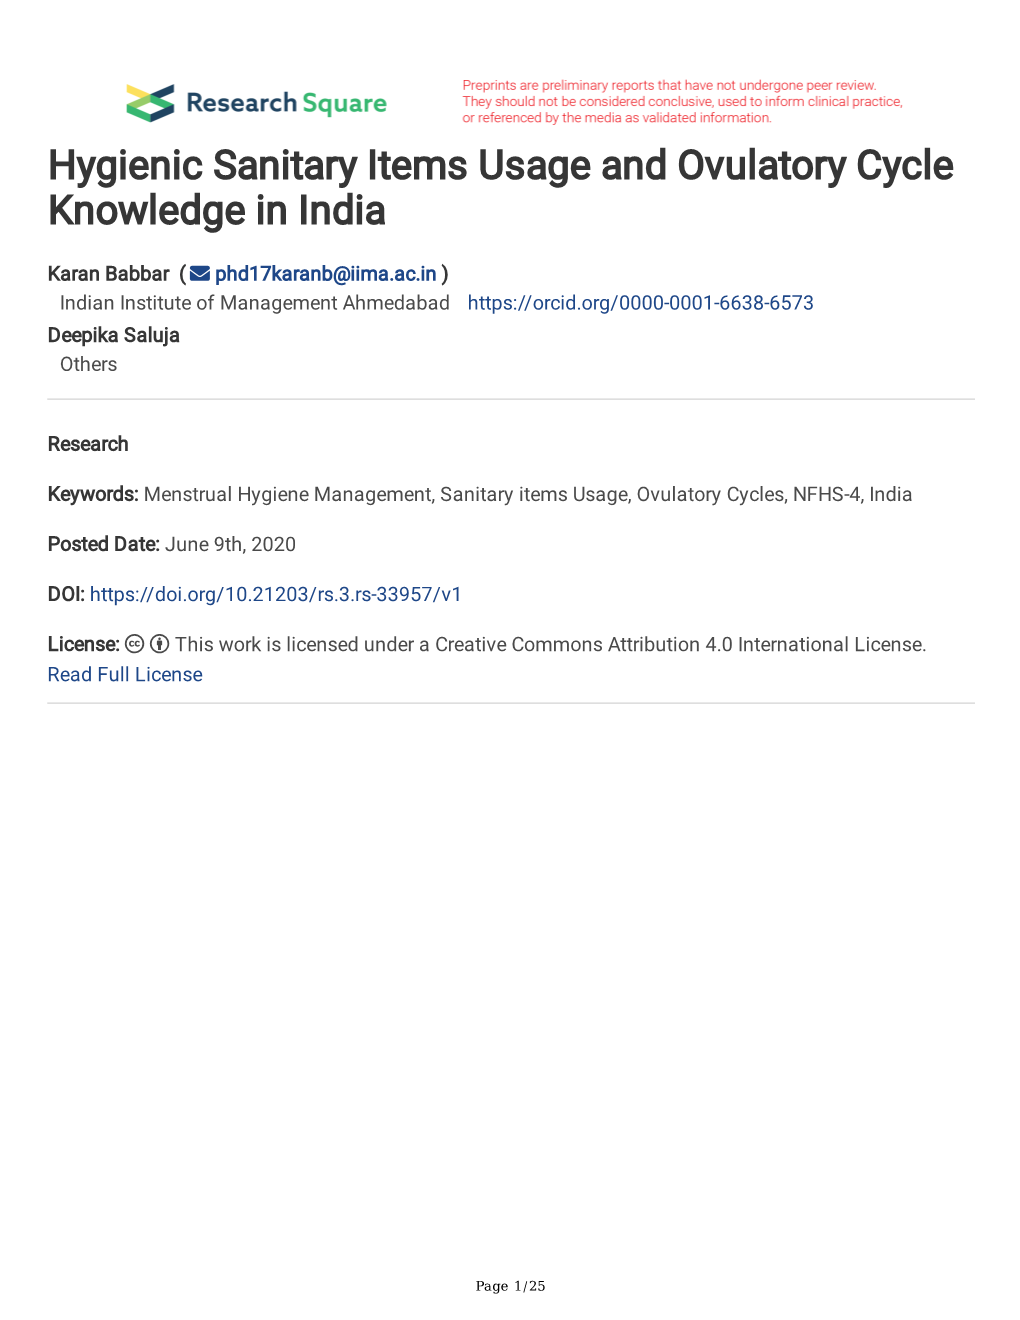 Hygienic Sanitary Items Usage and Ovulatory Cycle Knowledge in India